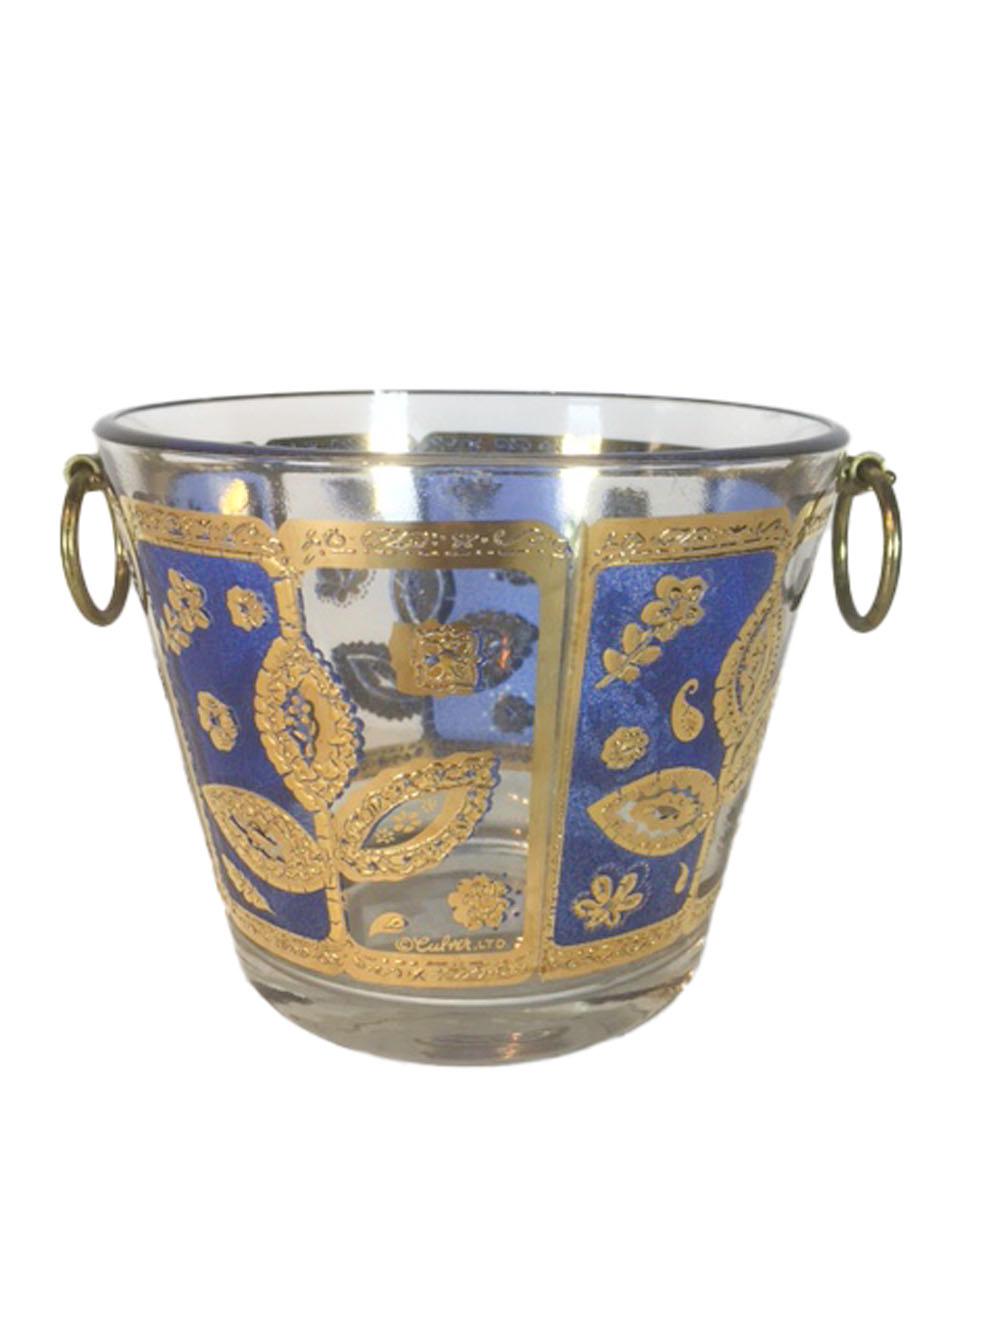 Seven piece barware set consisting of 6 double old fashioned glasses and an ice bowl with ring handles. Clear glass with translucent blue enamel in alternating panels and decorated with leafstems and flowers in raised 22-karat gold. The ice bucket